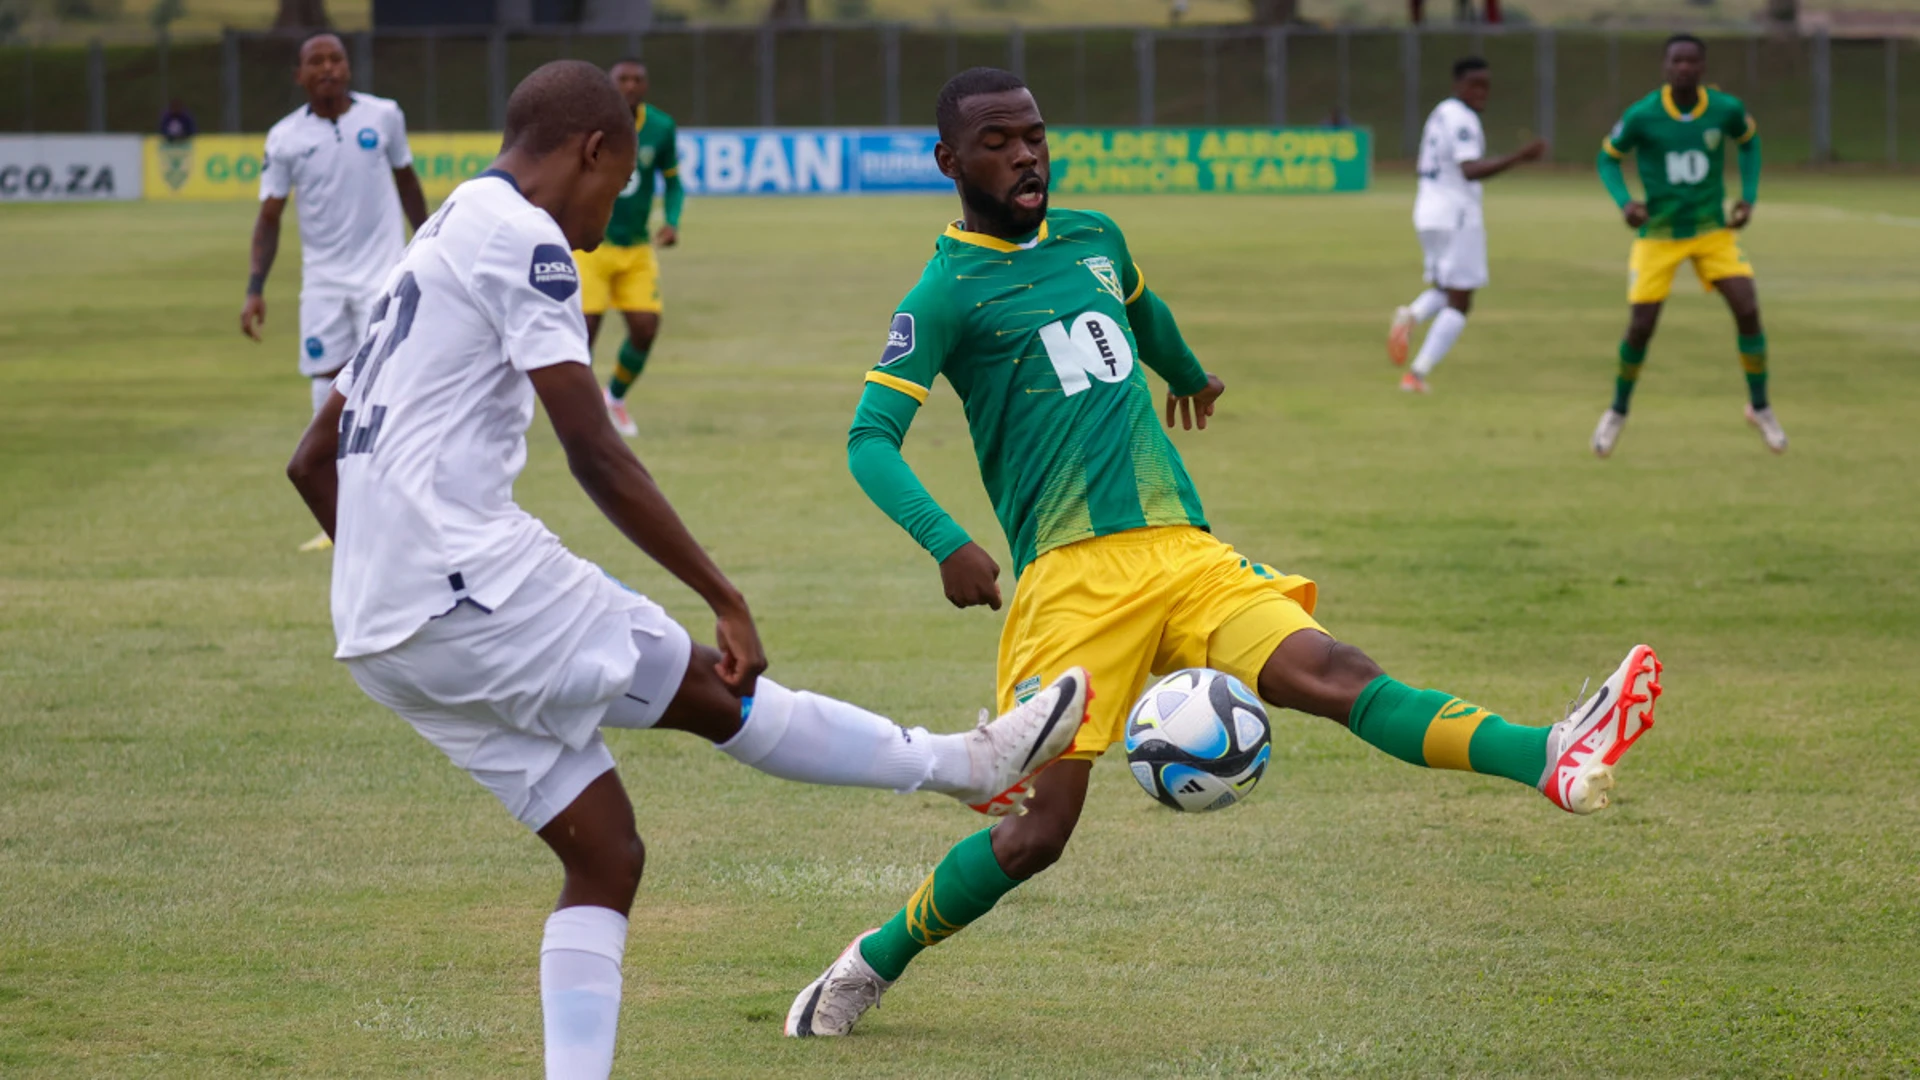 Super-sub Ncube inspires Arrows to Richards Bay win